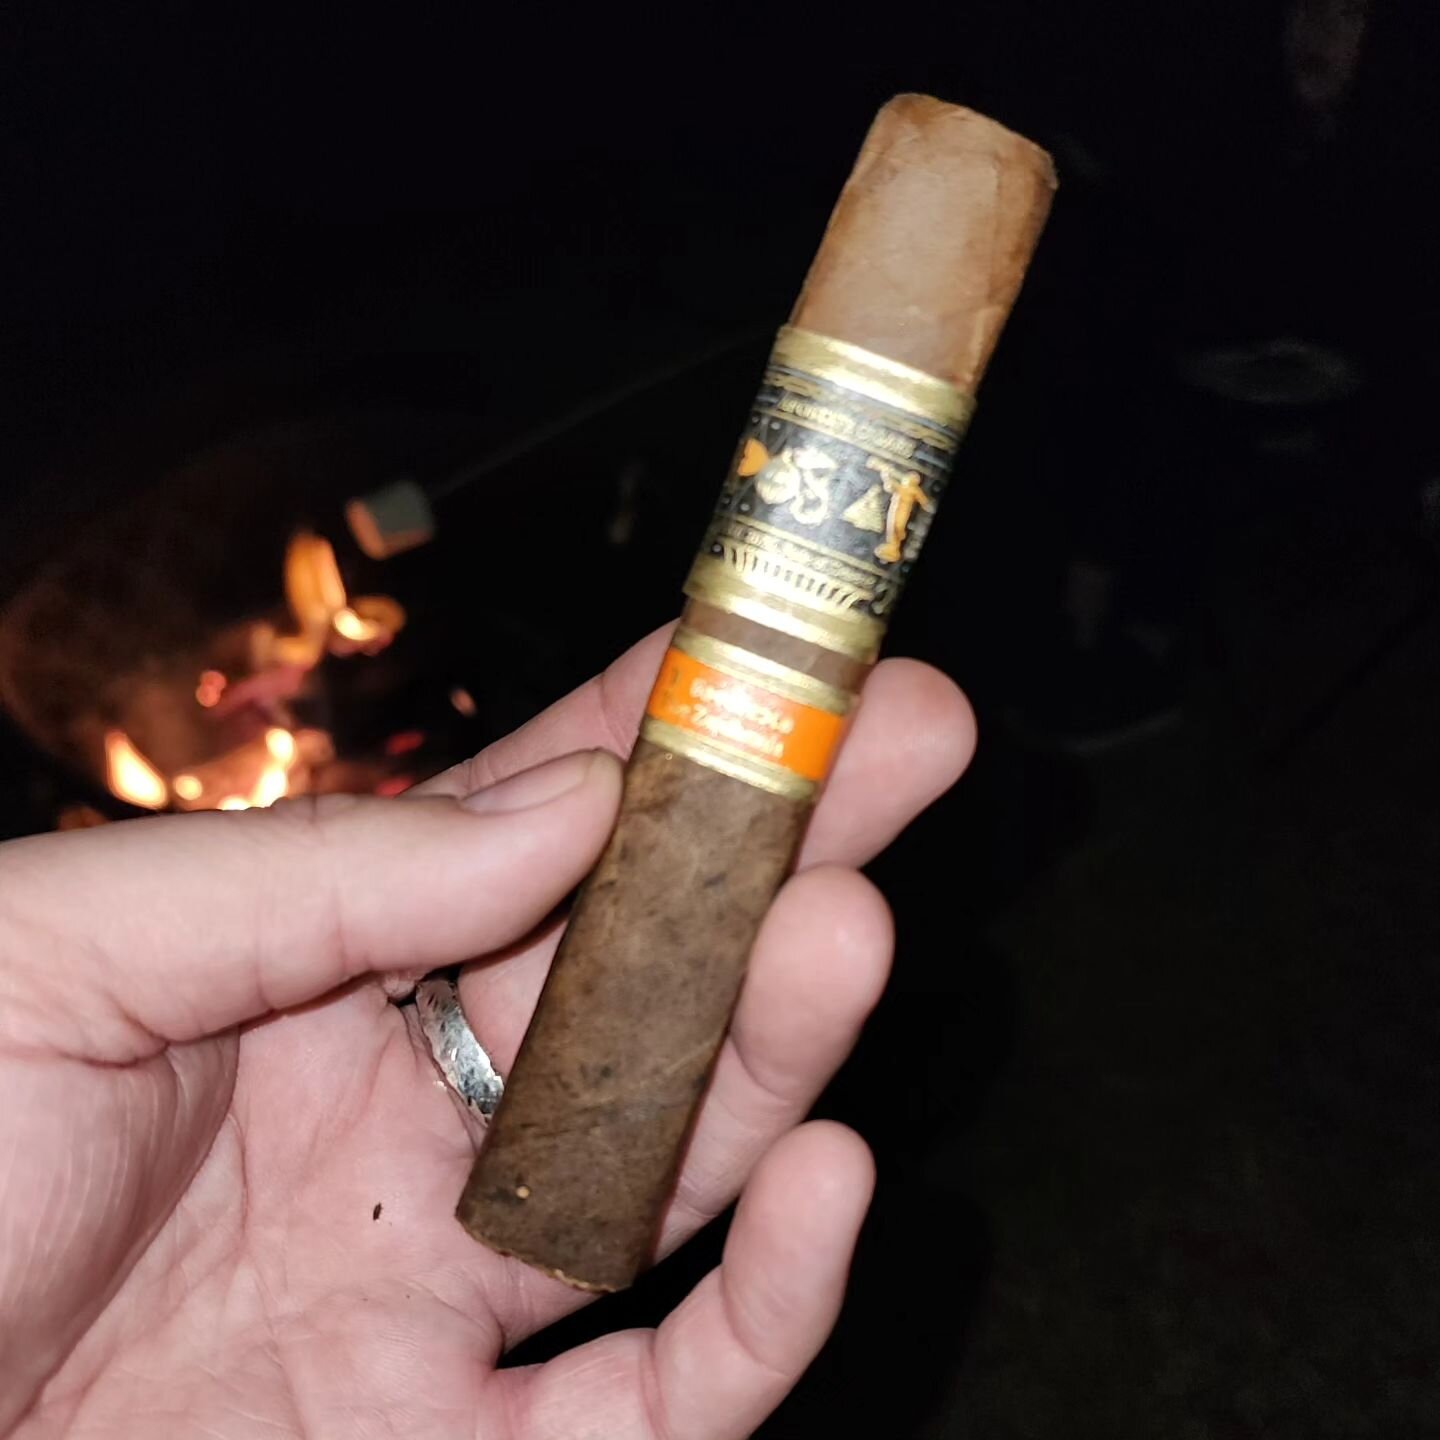 The boys are camping depending in the redwoods.  Enjoying the Zarahemla from @apostatecigars